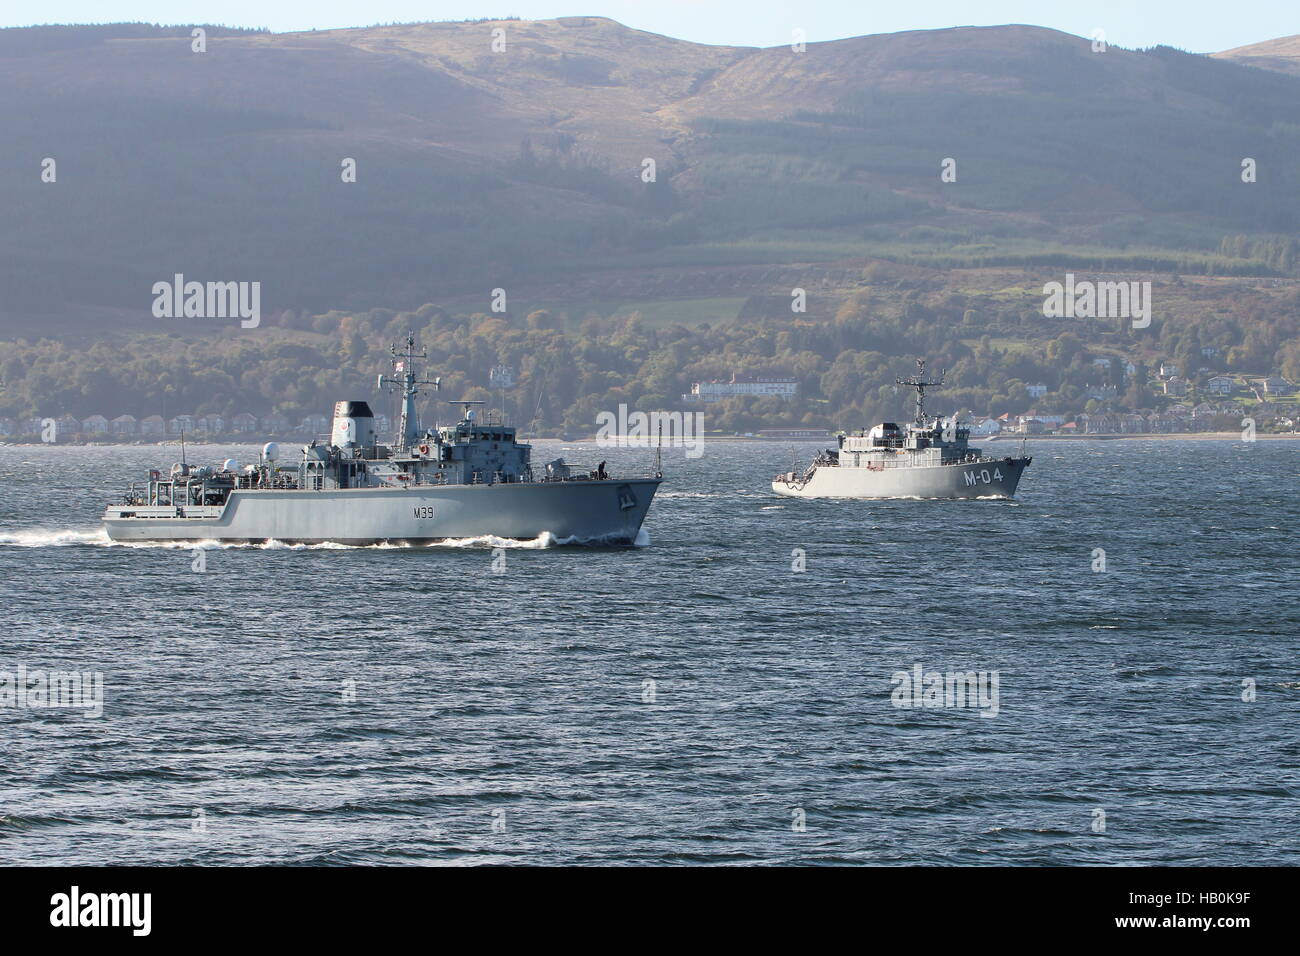 HMS Hurworth (M39) of the Royal Navy, and LVNS Imanta (M-04) of the Latvian Navy, arriving for Exercise Joint Warrior 16-2. Stock Photo